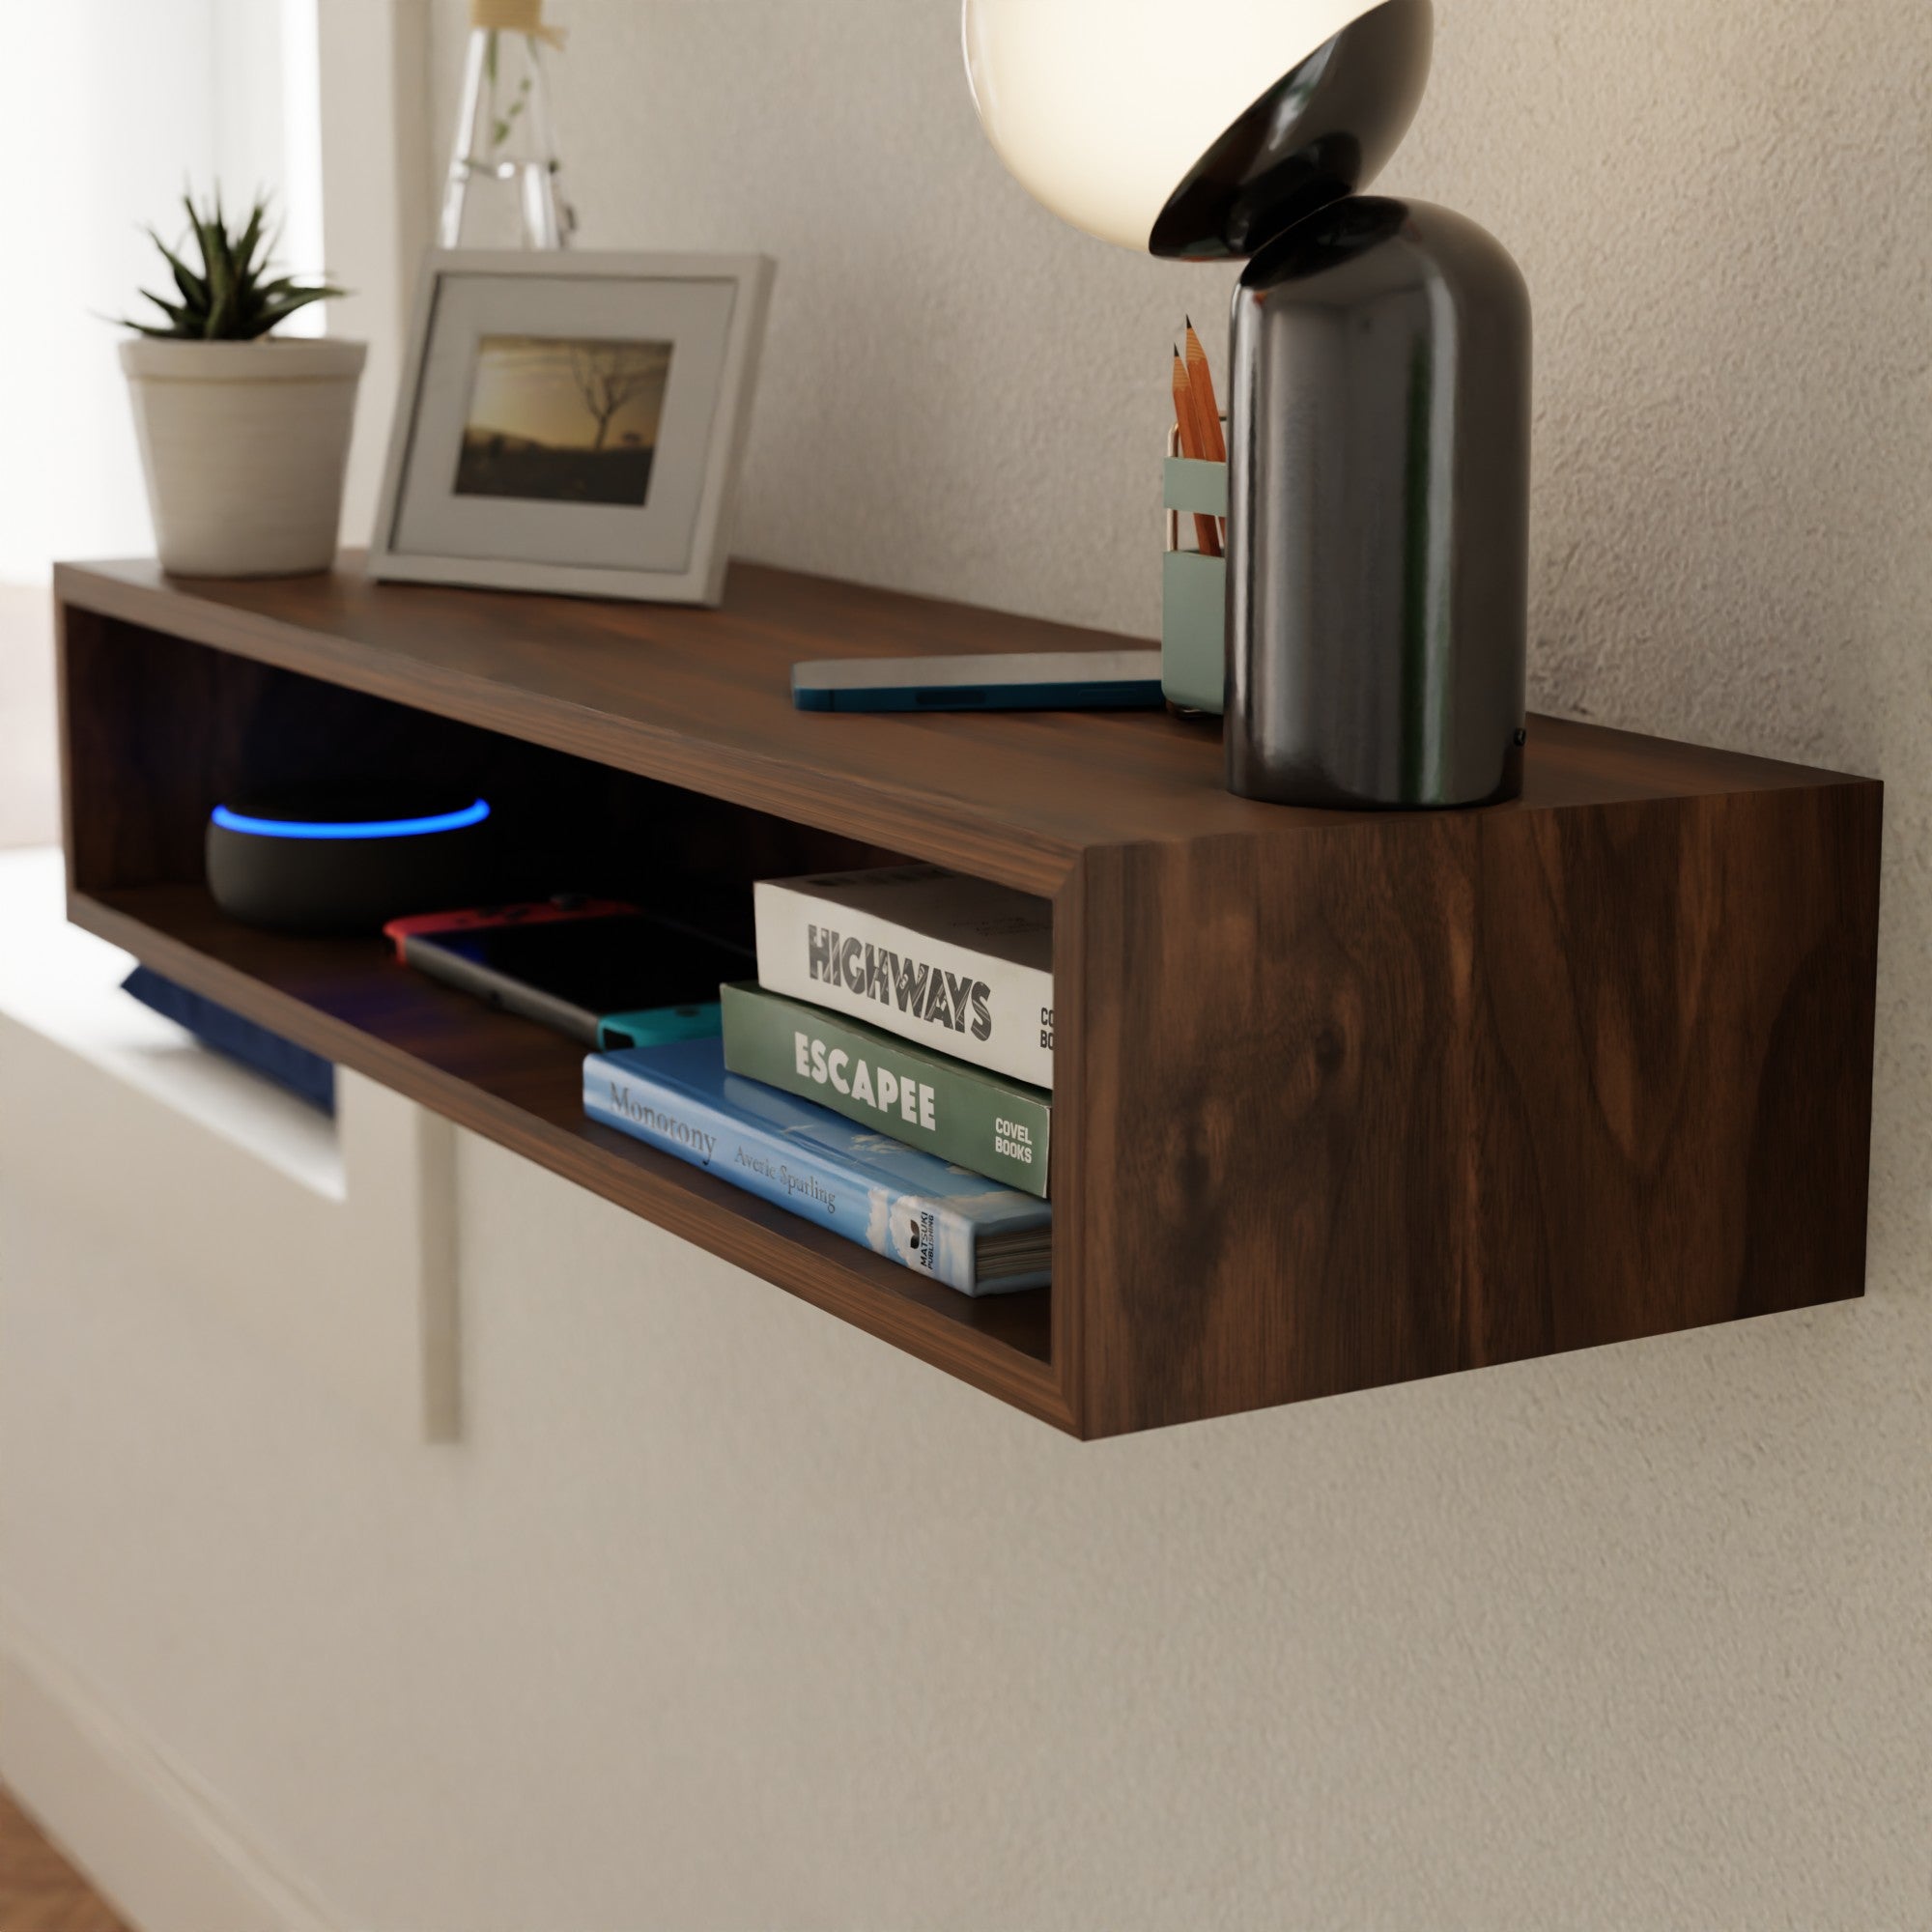 Floating Console Table in Walnut - Krøvel Furniture Co. Handmade in Maine